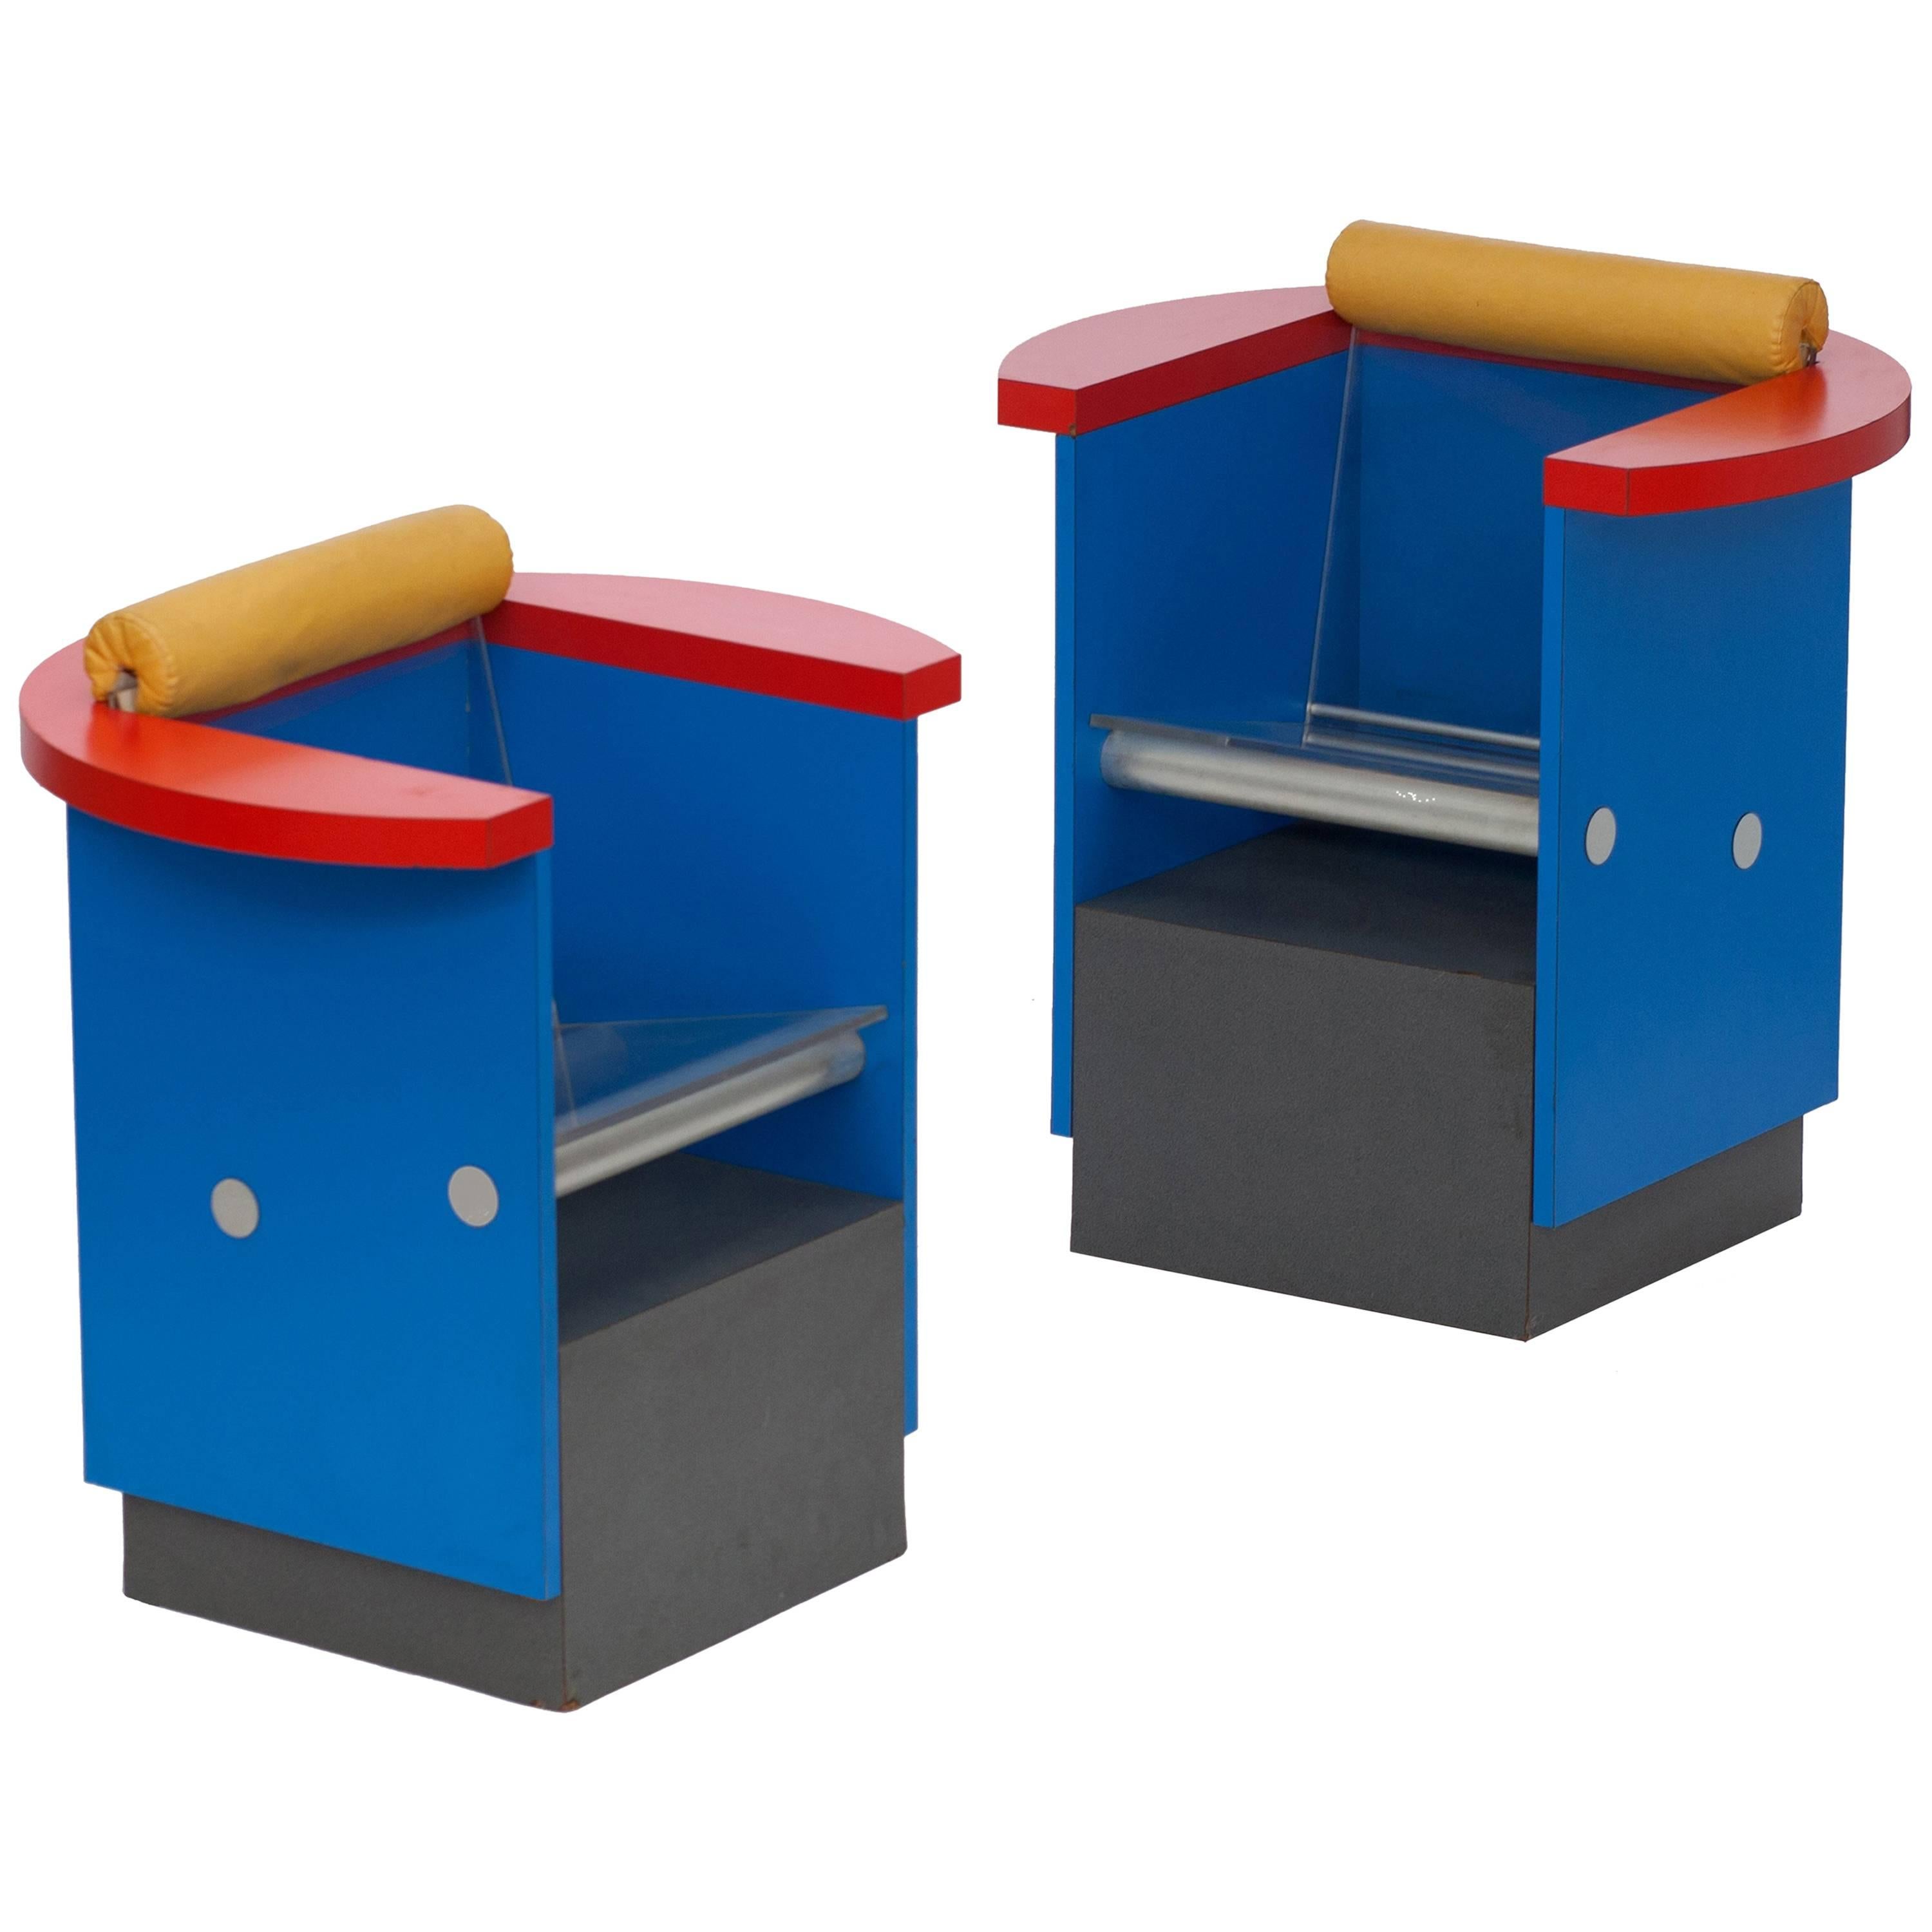 Memphis style Unusual Pair of Blue, Red and Yellow Chairs